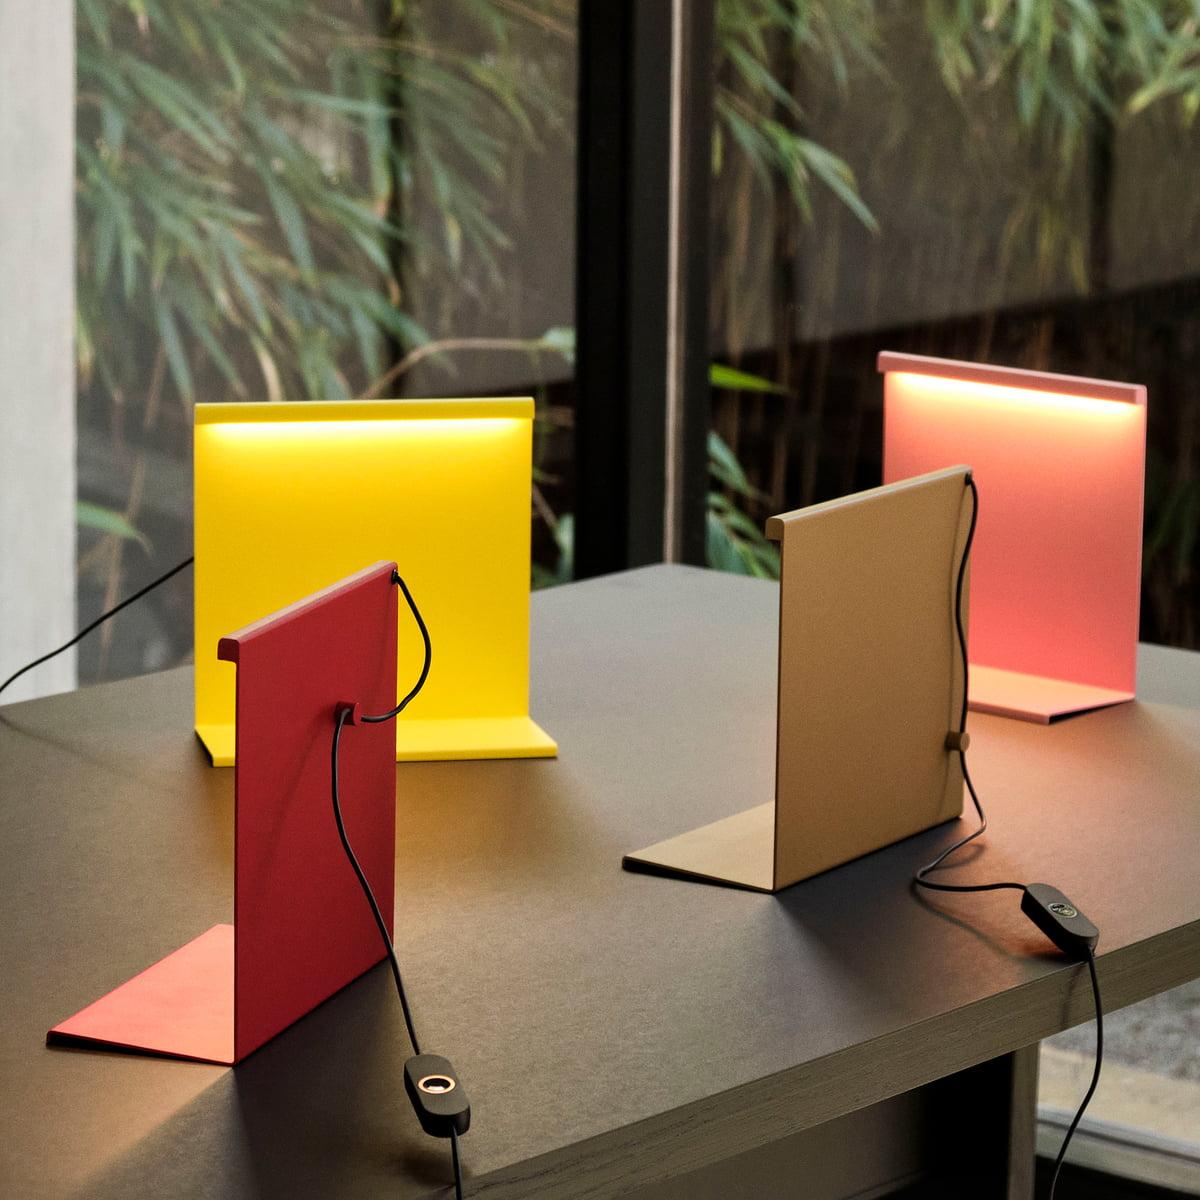 
Inspired by the innovative architecture of fellow Mexican Luis Barragan, Moisés Hernández designed the LBM Table Lamp to reflect his fascination with monolithic geometry, color, light and shadows. Constructed from thin planes of vertical sheet